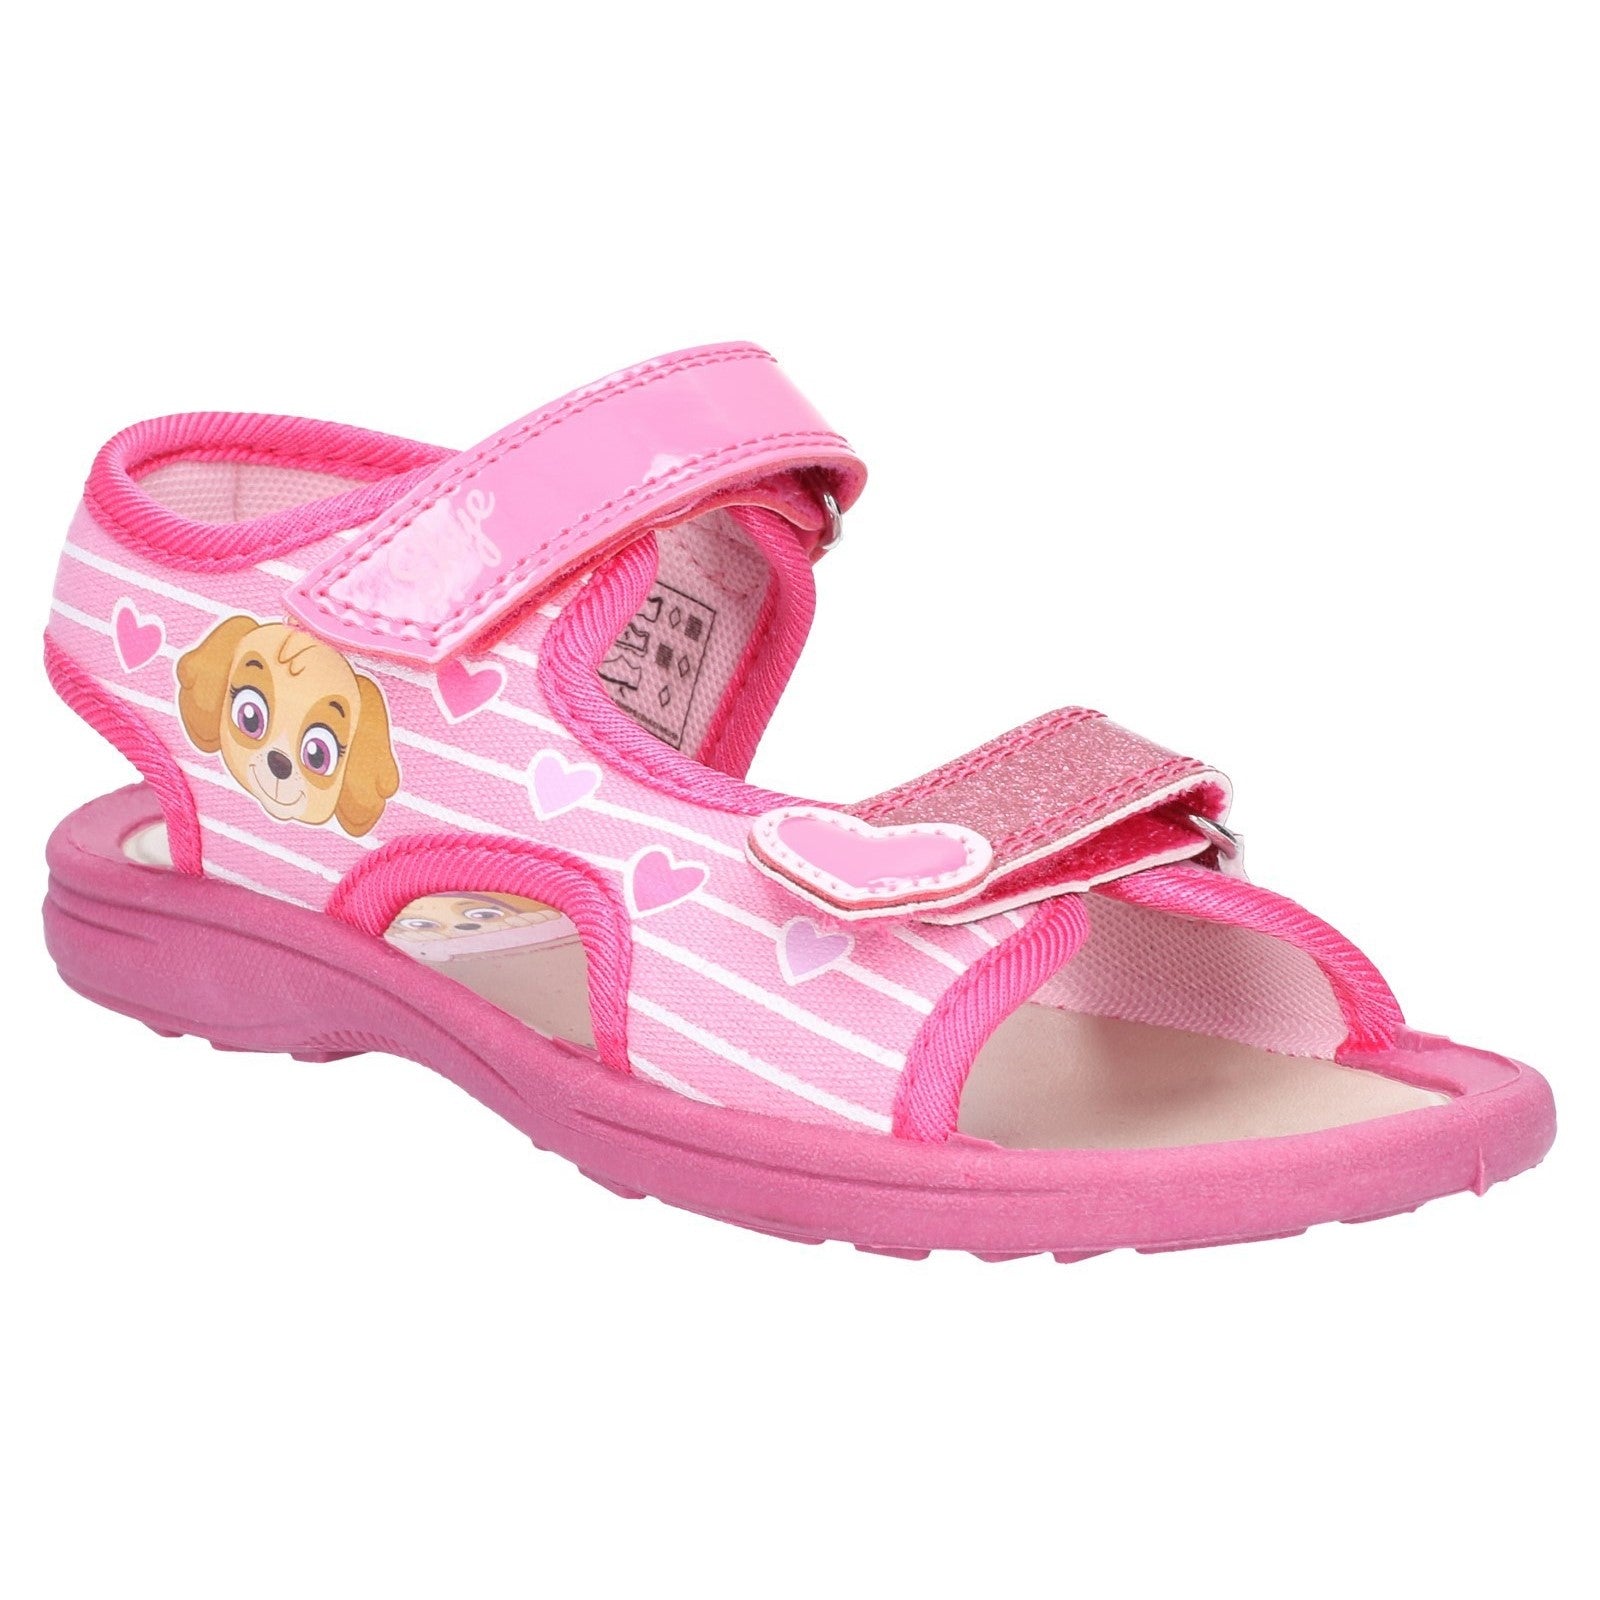 Leomil Paw Patrol Classic Sandals Touch Fastening Shoe